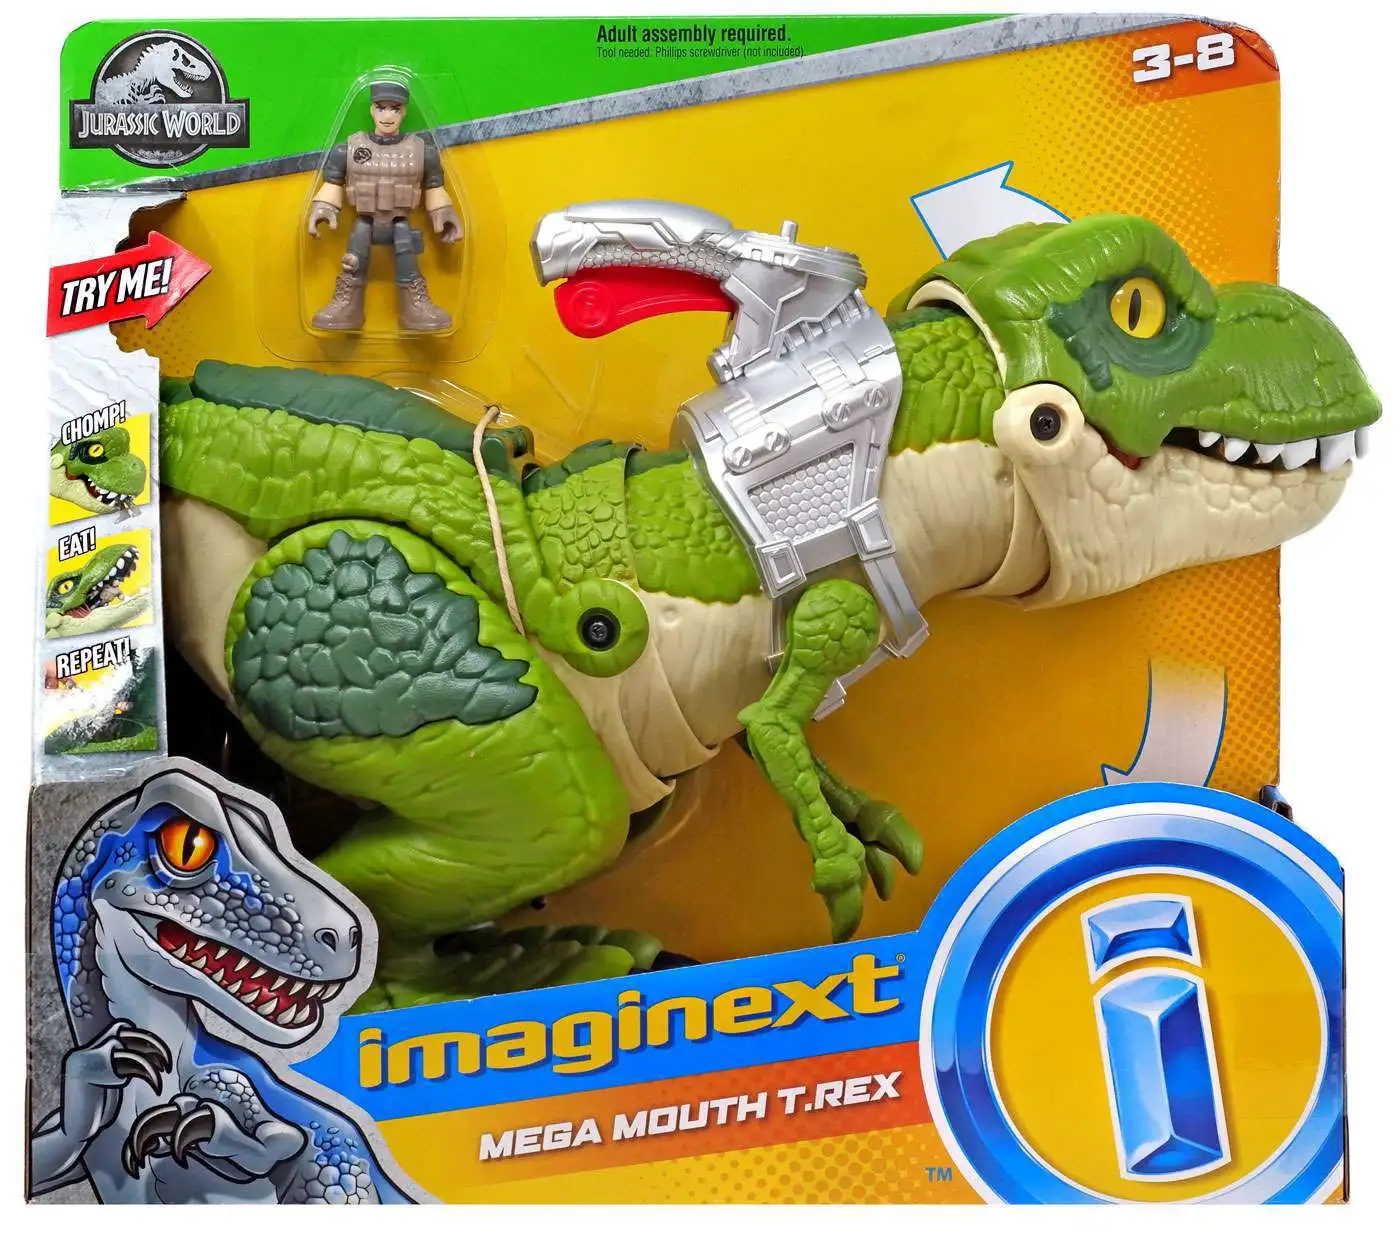 Fisher-Price GBN14 Imaginext Jurassic World Mega Mouth T-Rex for sale online 